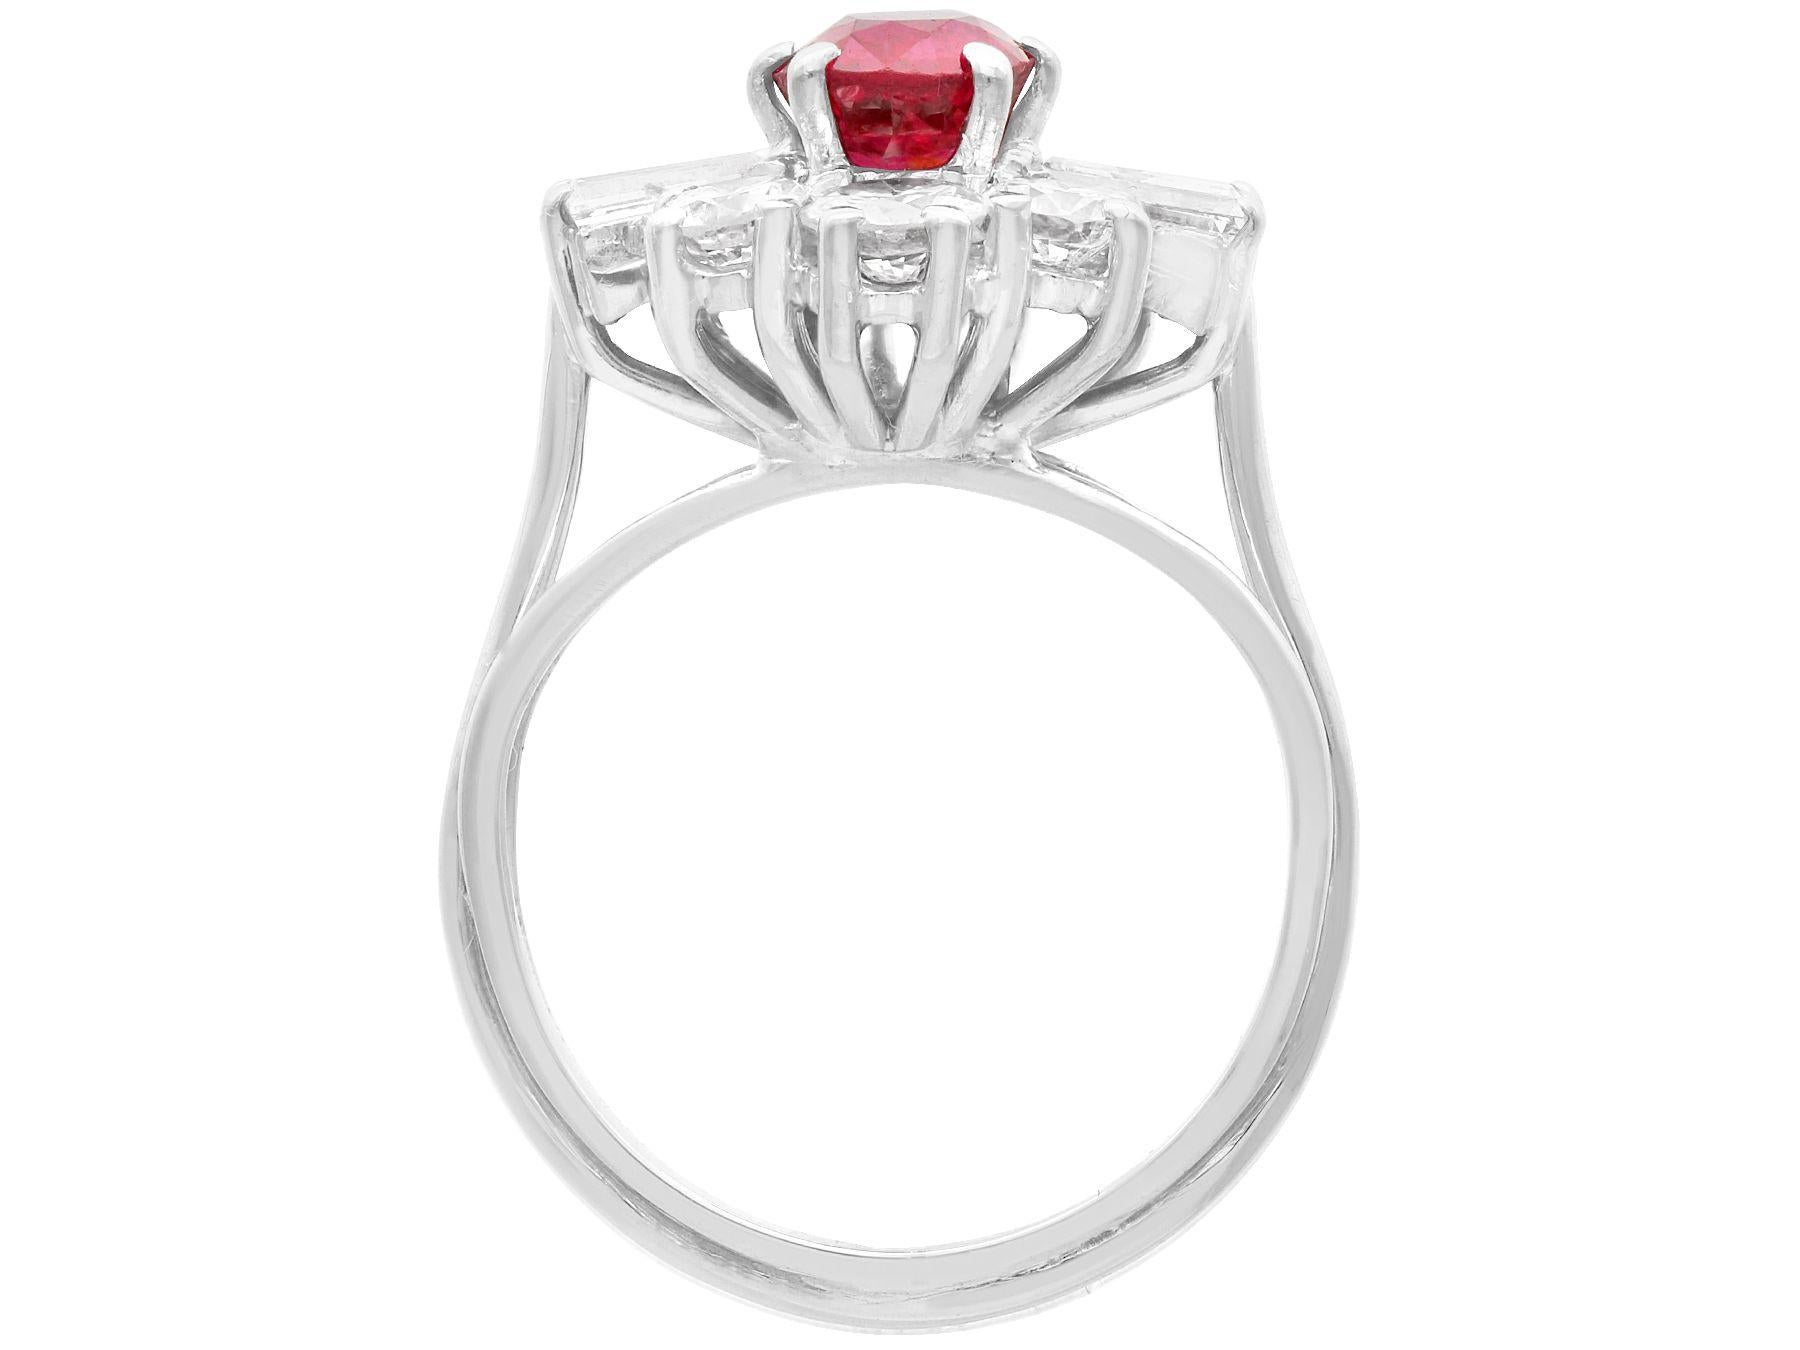 Women's or Men's Vintage 1.18 Carat Ruby and 1.38 Carat Diamond White Gold Cluster Ring For Sale